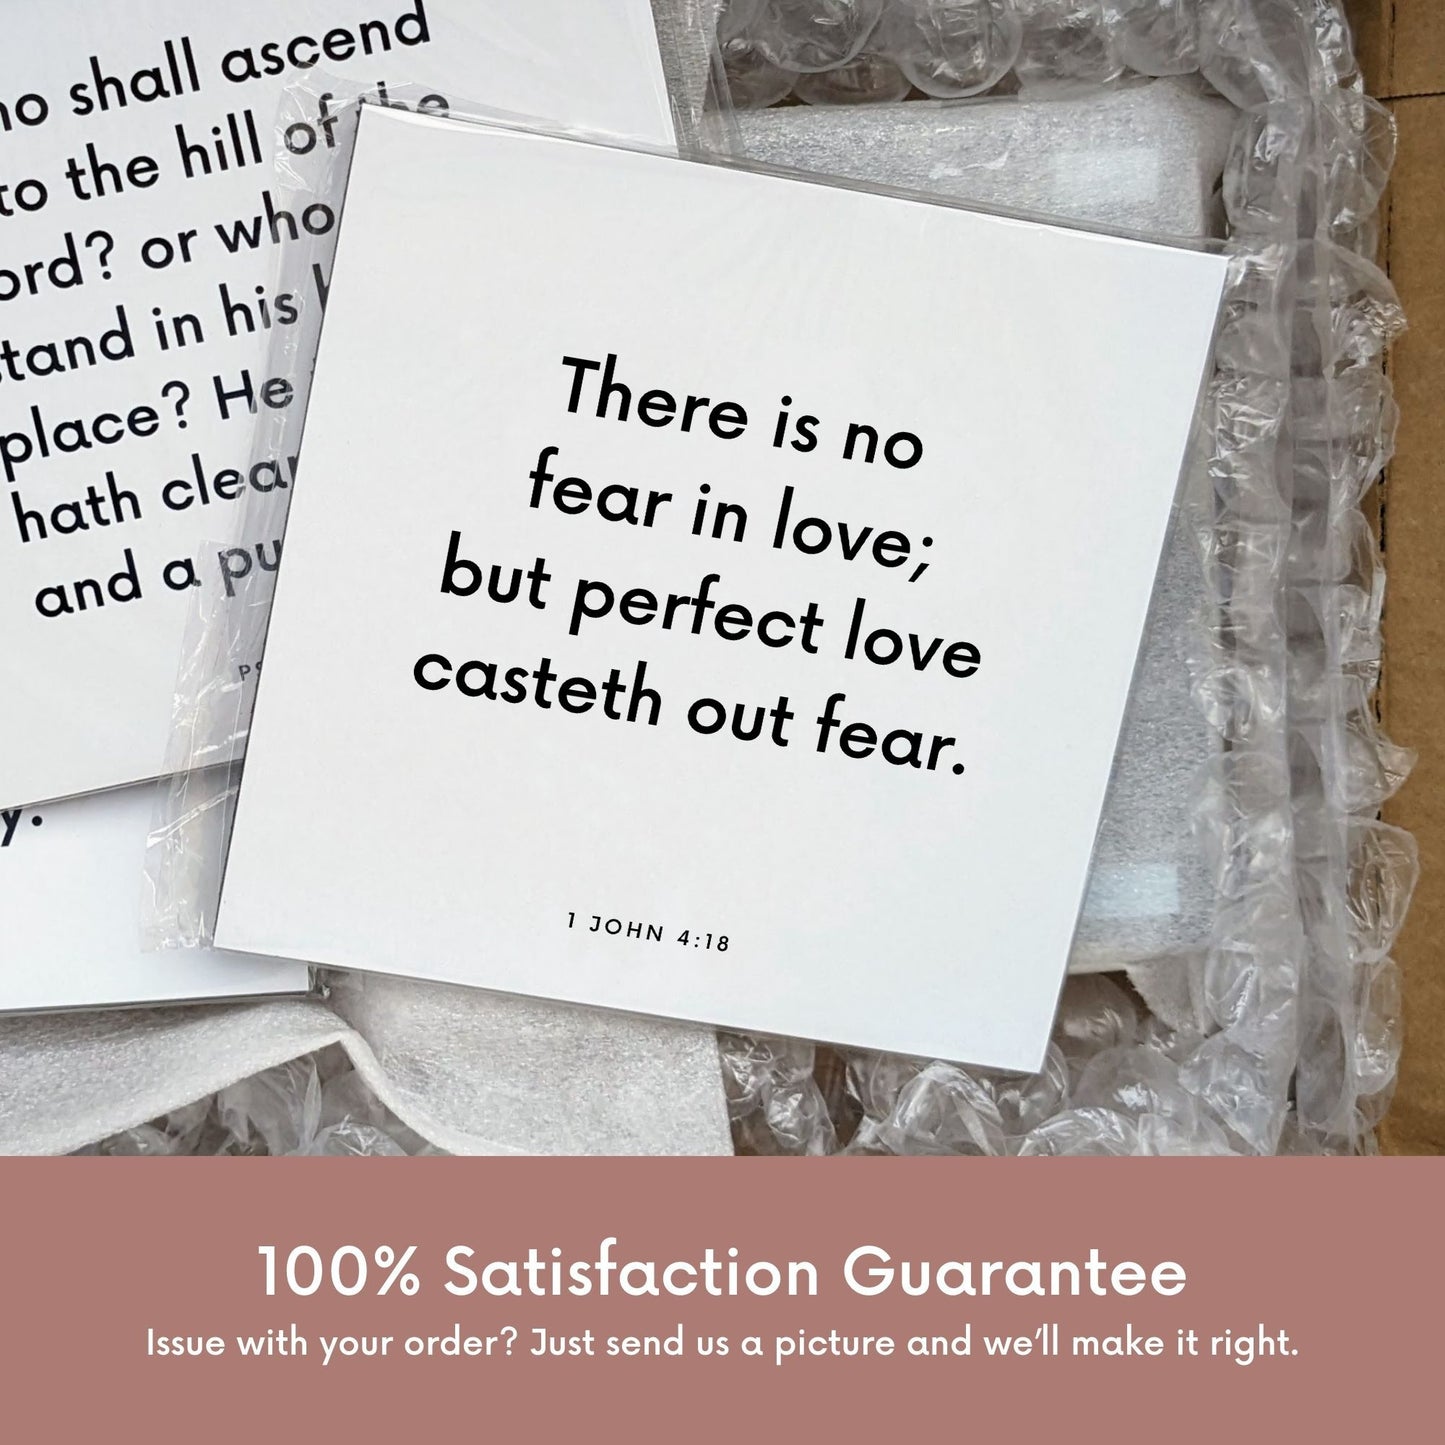 Shipping materials for scripture tile of 1 John 4:18 - "There is no fear in love; but perfect love casteth out fear"